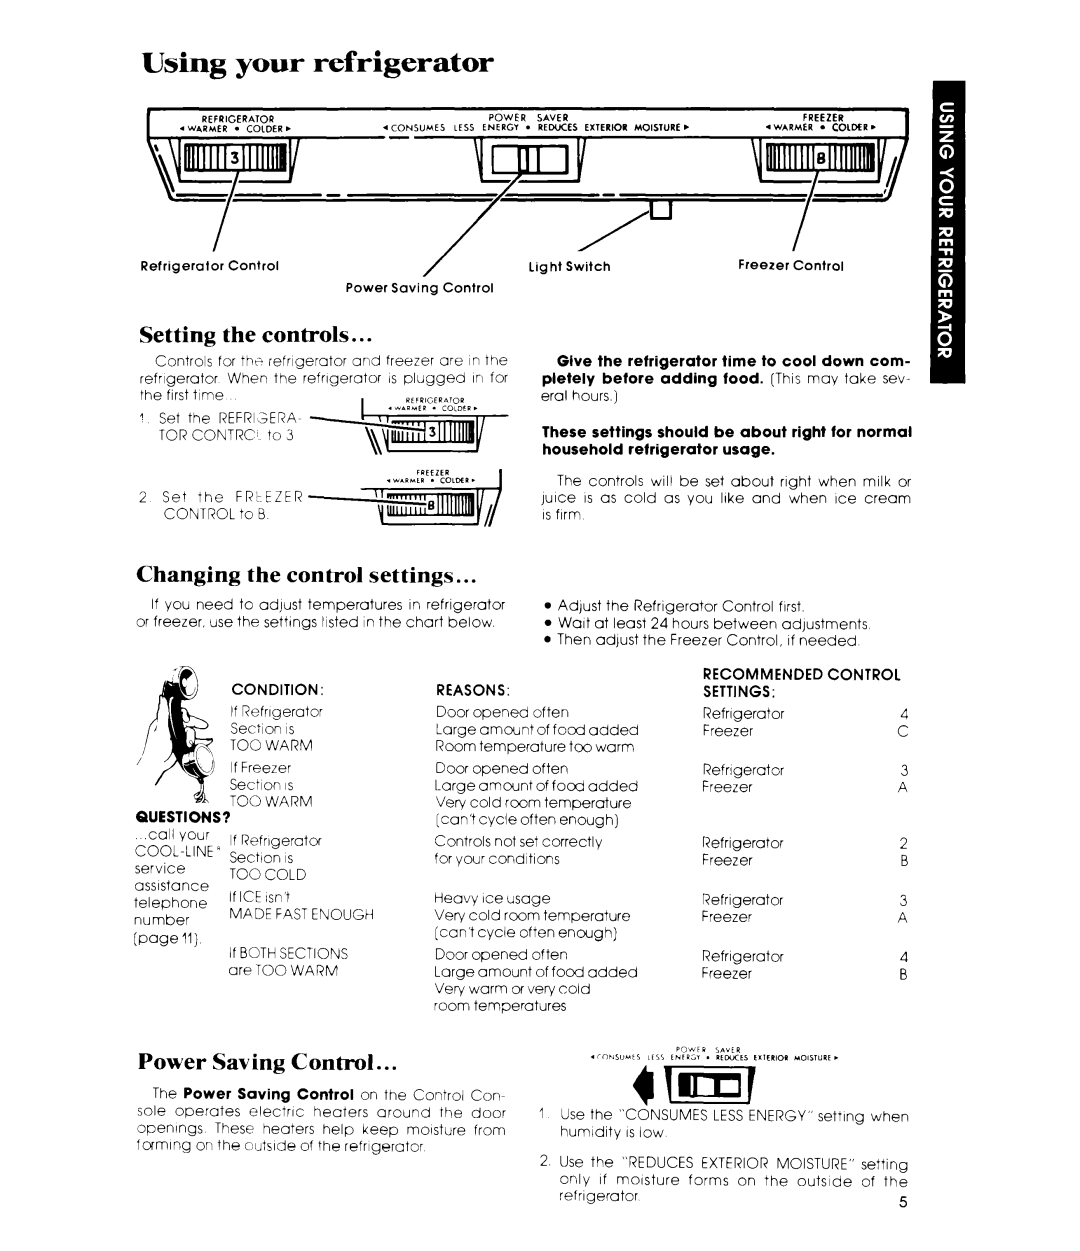 Whirlpool ETl8CK manual Using your refrigerator, Setting the controls, Changing the control settings, Power Saving Control 